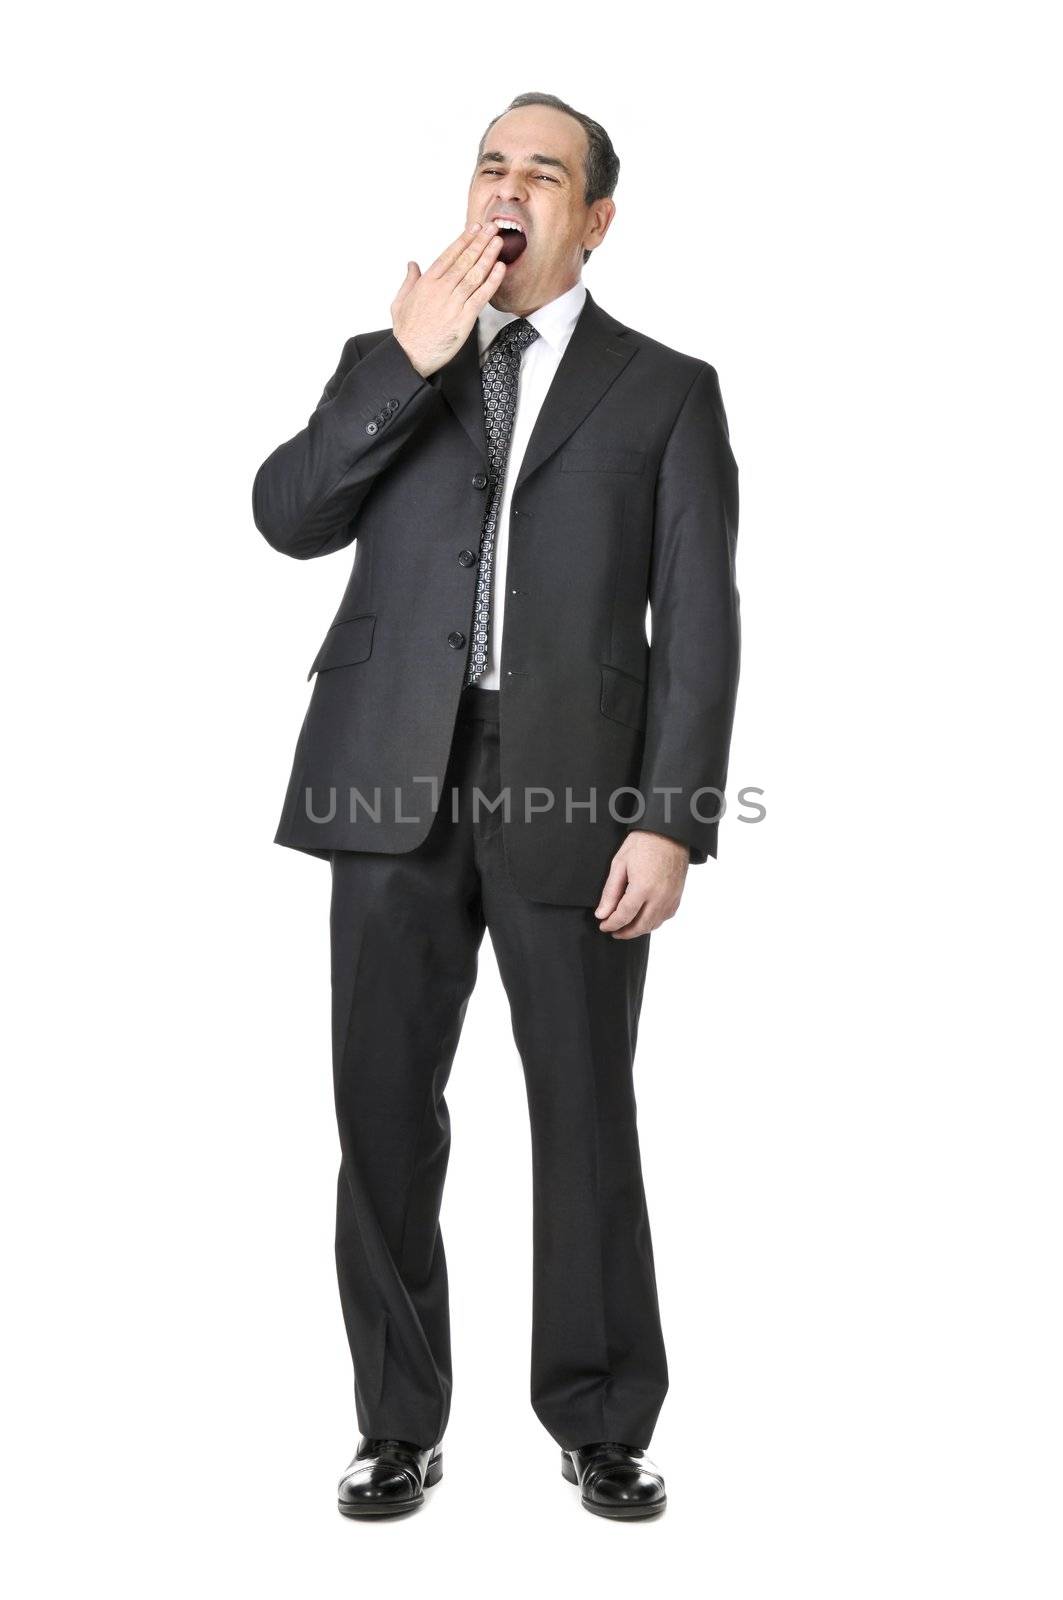 Bored yawning businessman in a suit isolated on white background